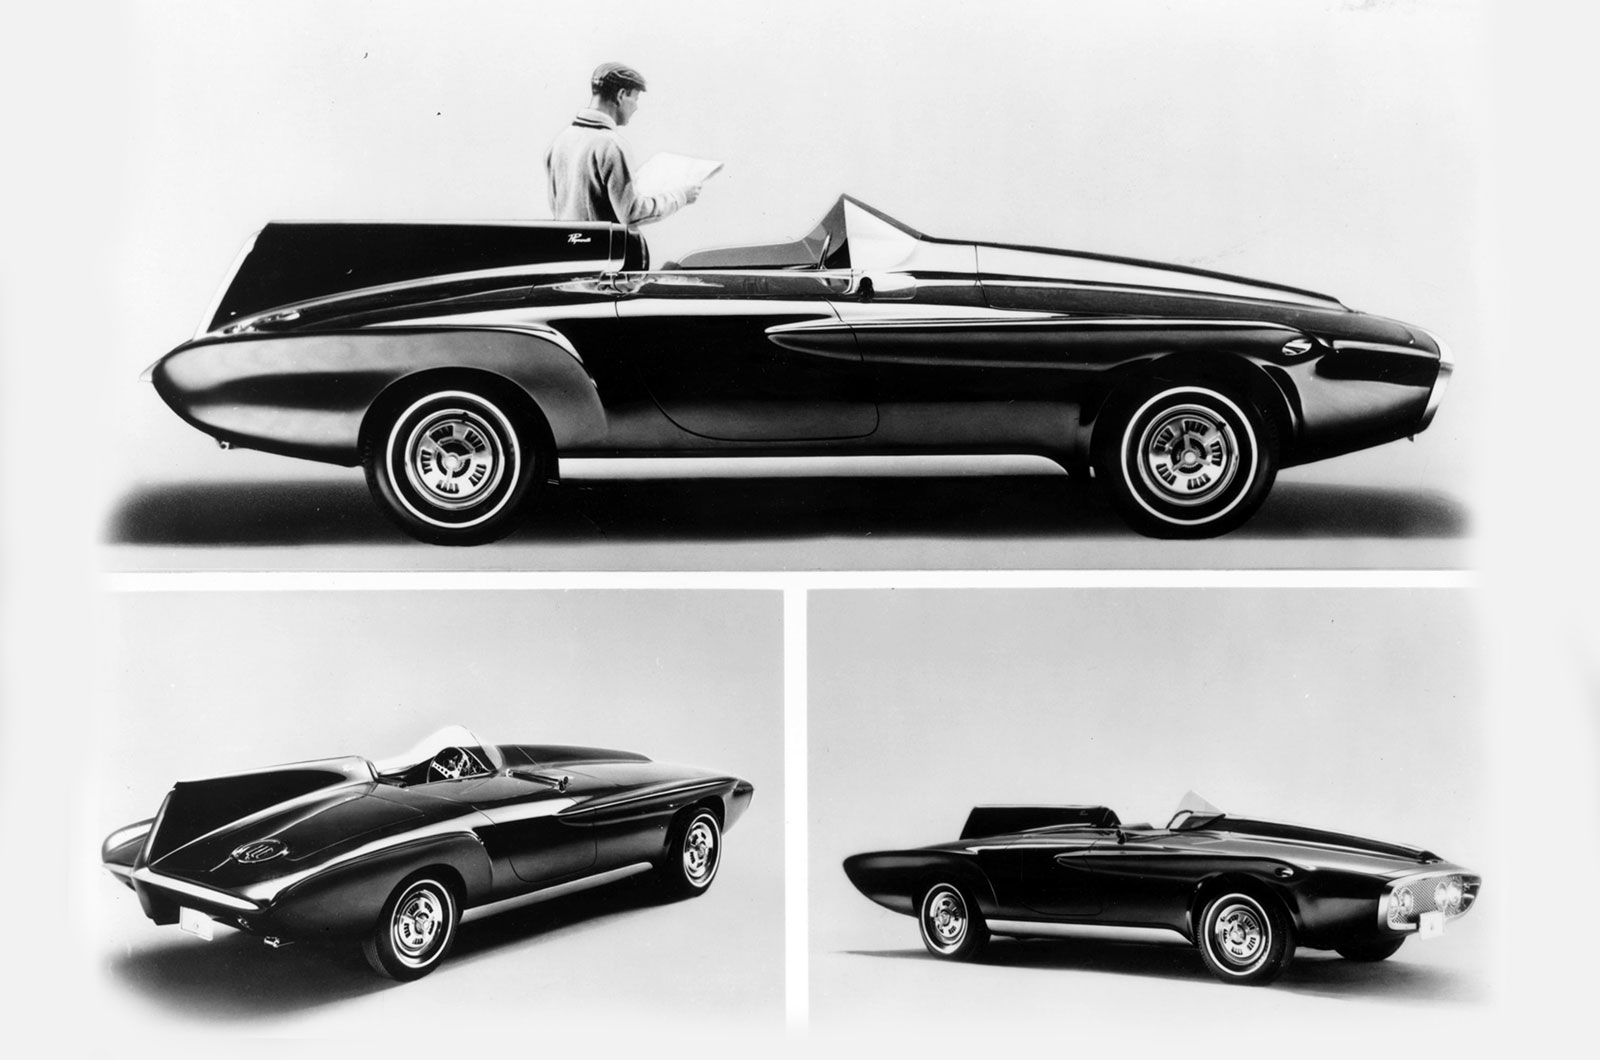 <p>Asymmetrical in the same way as a Jaguar D-Type, with its off-centre fairing, the Plymouth XNR could seat two, but with a tonneau over the passenger seat it was generally set up for just a driver. Power came from a 2.8-liter straight-six rated at 250bhp.</p>